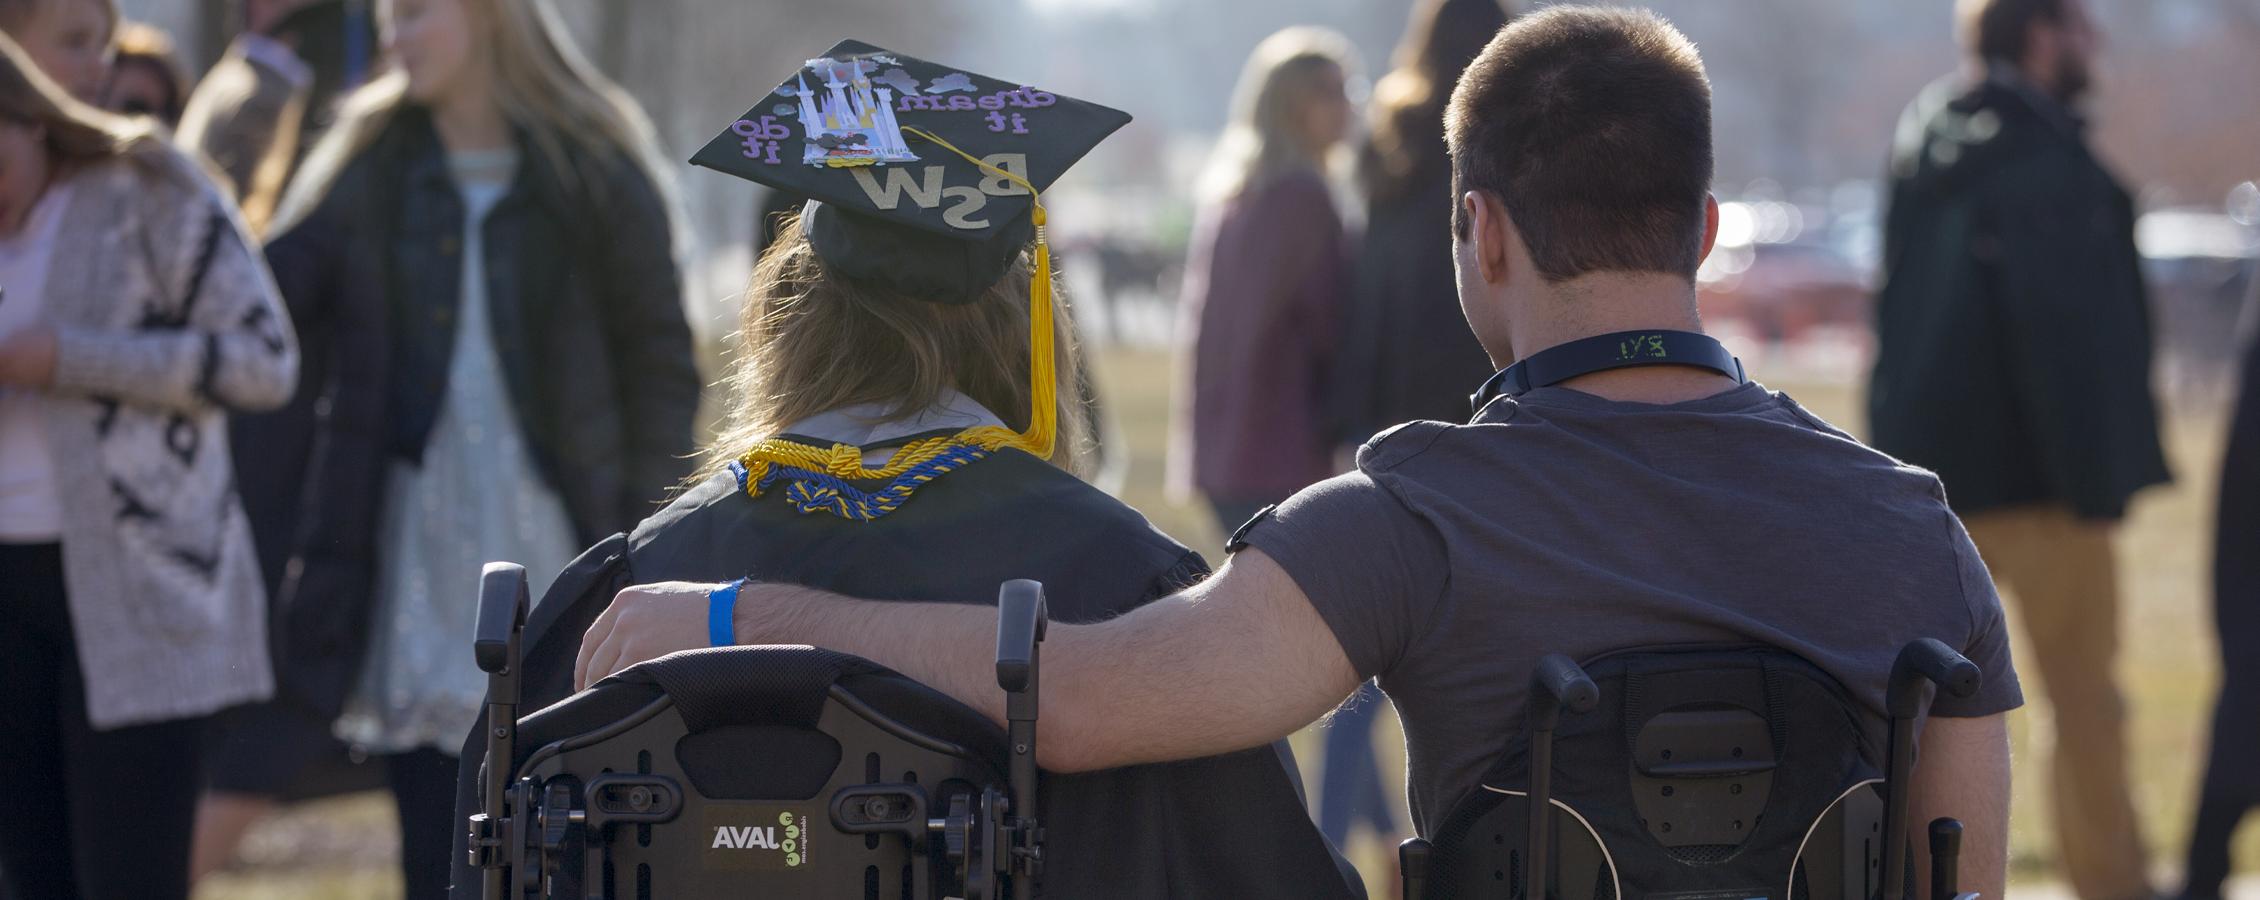 Two people in wheelchairs with their arms around each other at graduation.